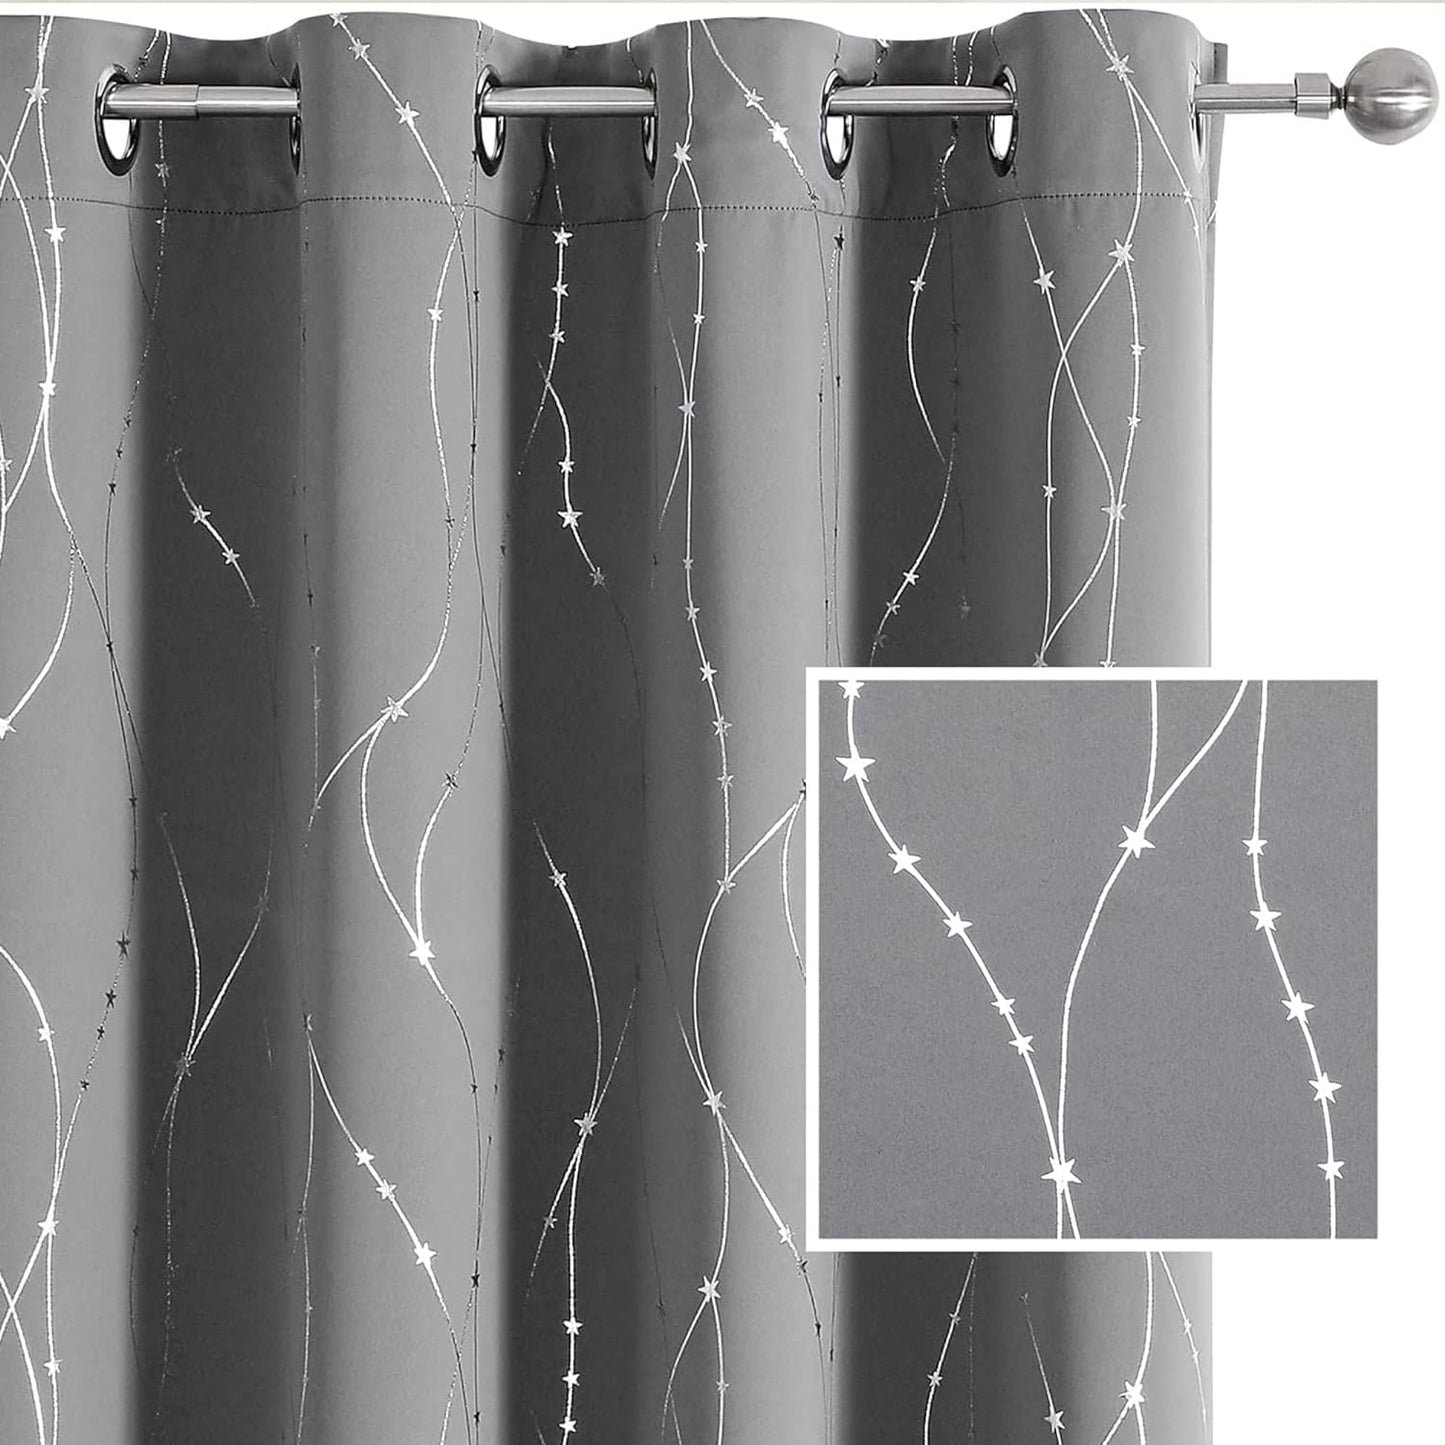 SMILE WEAVER Black Blackout Curtains for Bedroom 72 Inch Long 2 Panels,Room Darkening Curtain with Gold Print Design Noise Reducing Thermal Insulated Window Treatment Drapes for Living Room  SMILE WEAVER Light Grey Silver 52Wx72L 